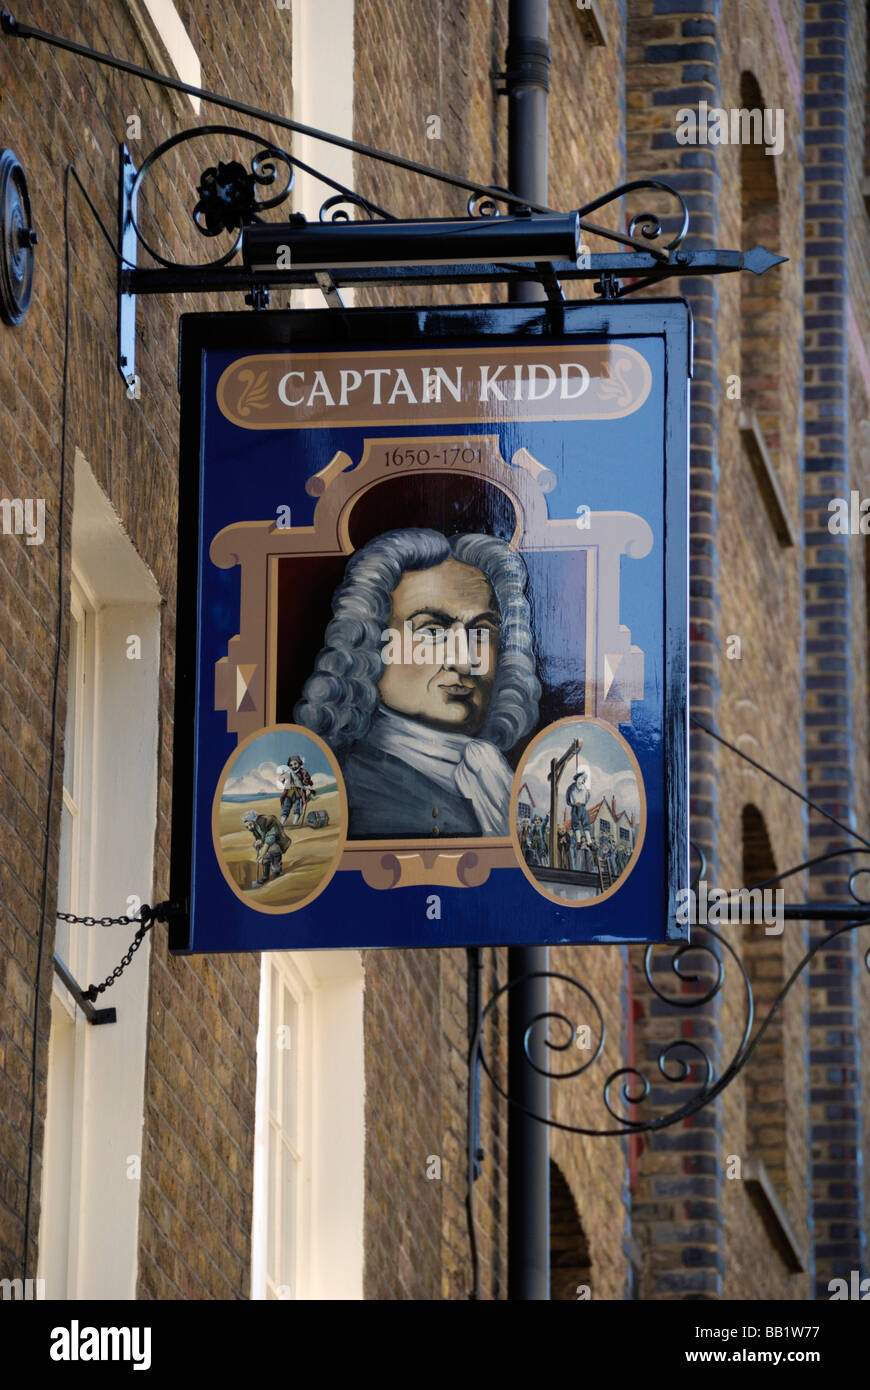 The Captain Kidd pub in Wapping High Street Wapping London Stock Photo